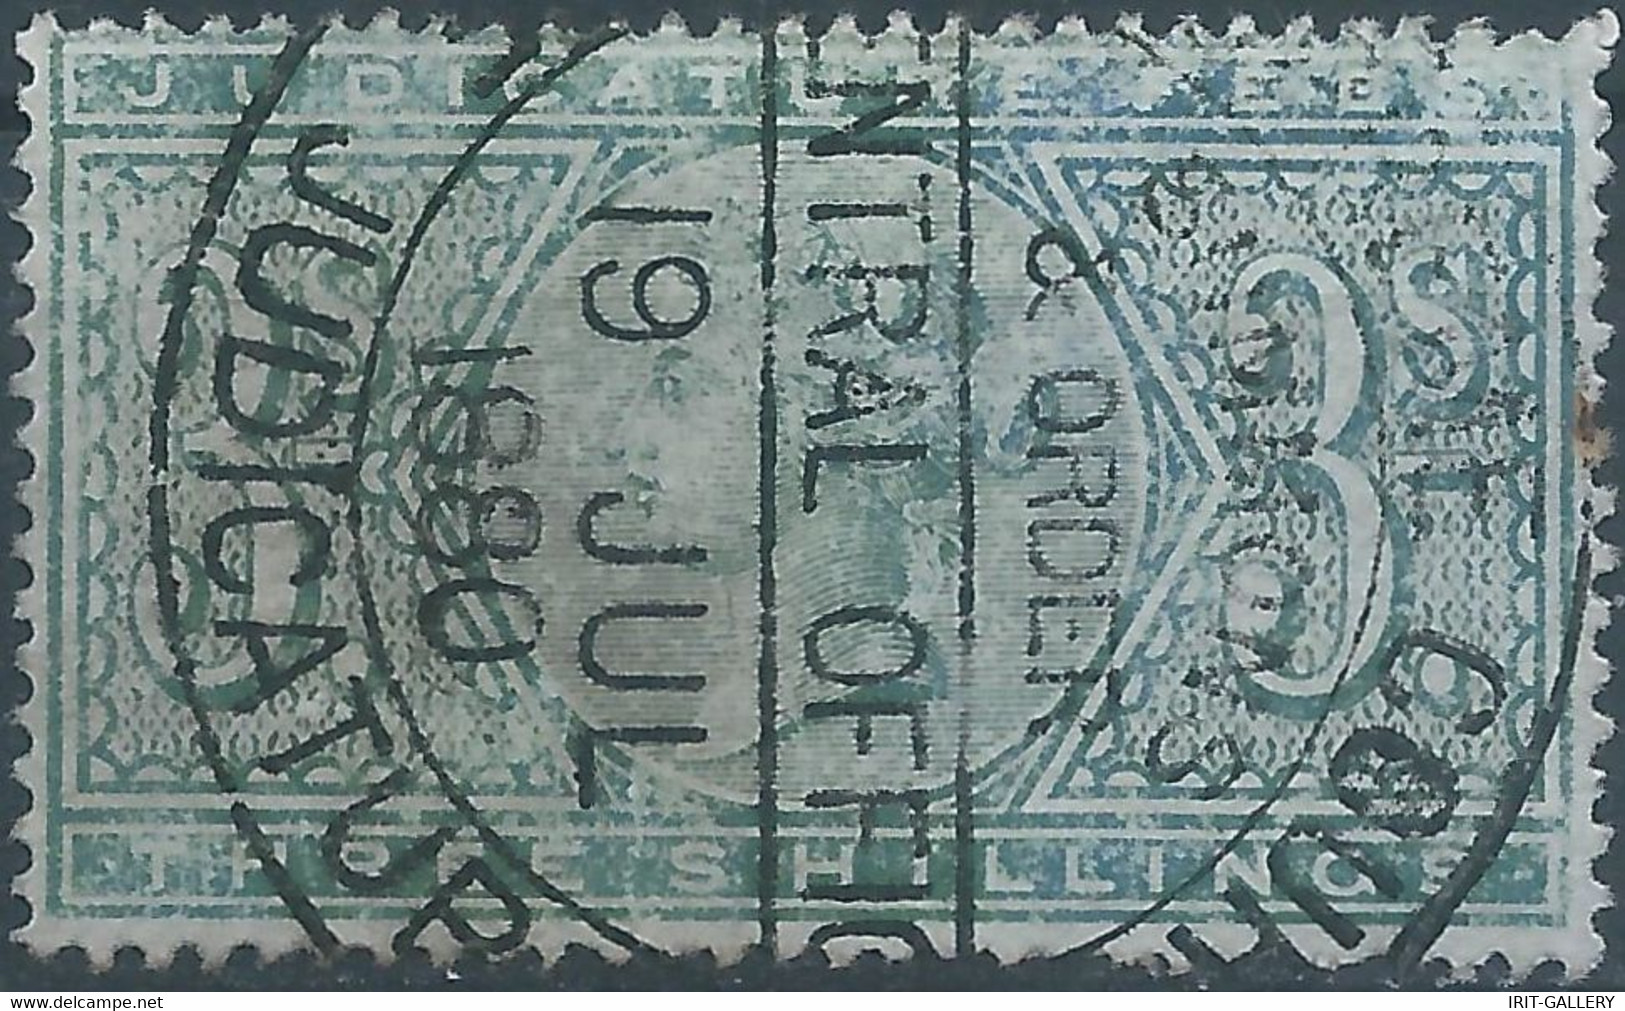 Great Britain-ENGLAND,Queen Victoria,1880 Revenue Stamp Tax Fiscal,JUDICATURE FEES, 3 Shillings,Used - Fiscali